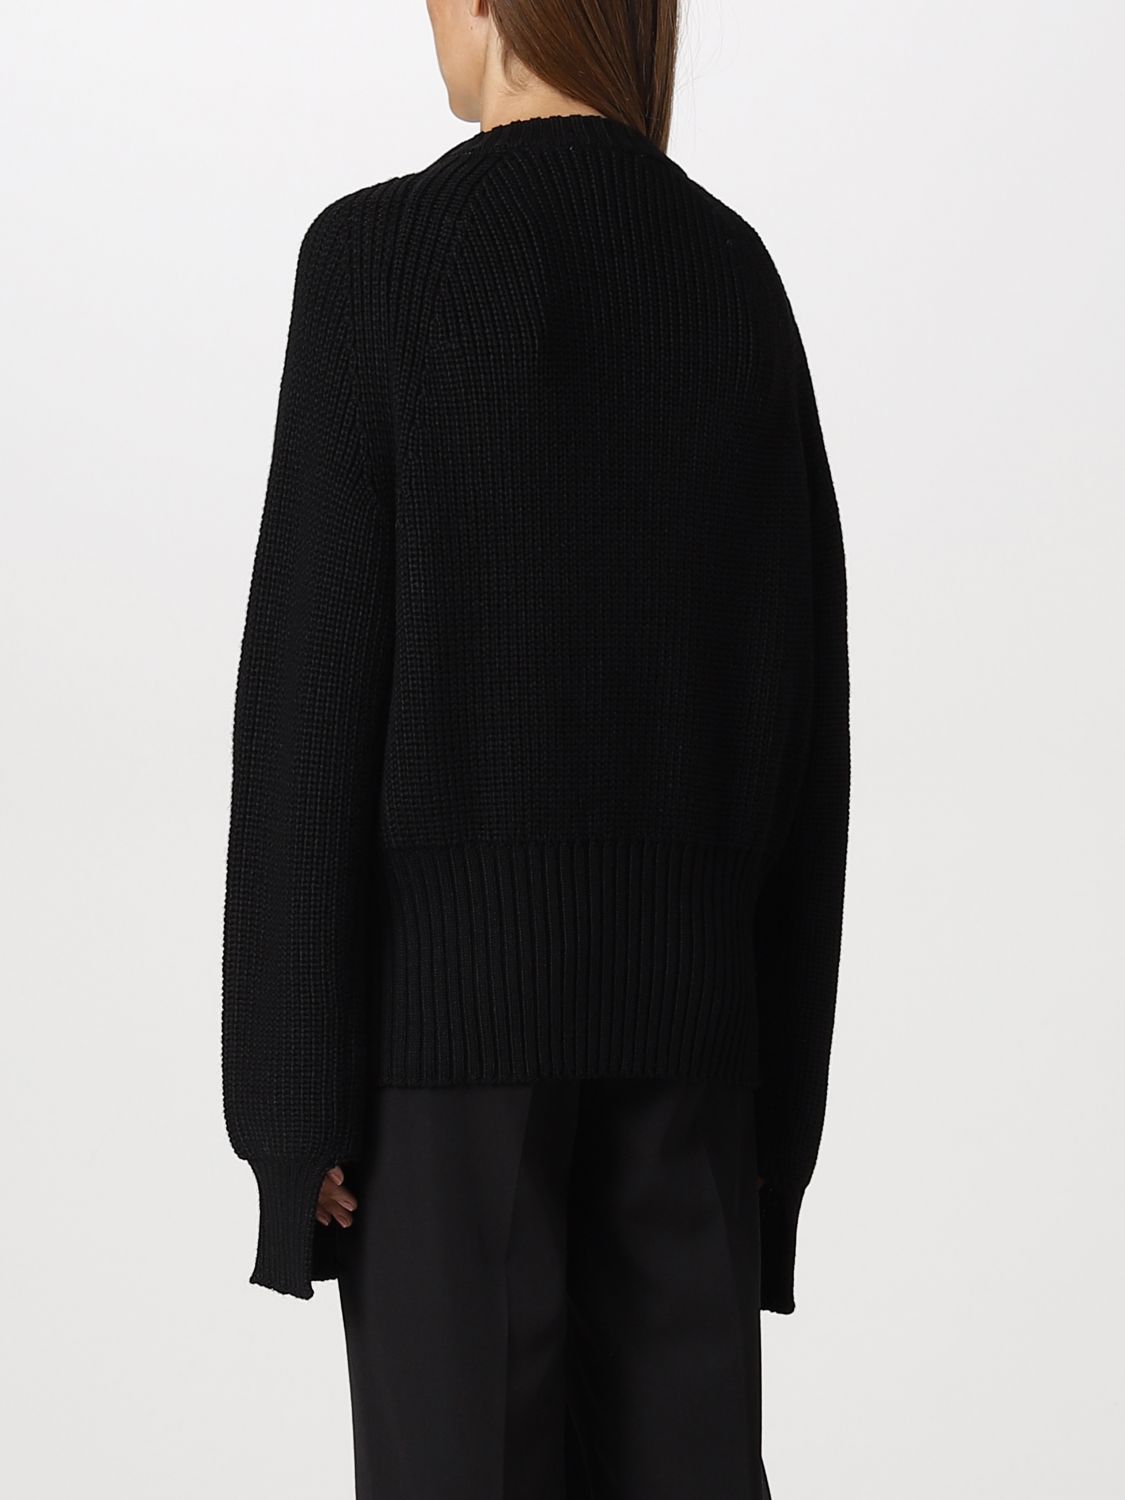 Sweater Rohe: Rohe sweater for woman black 2